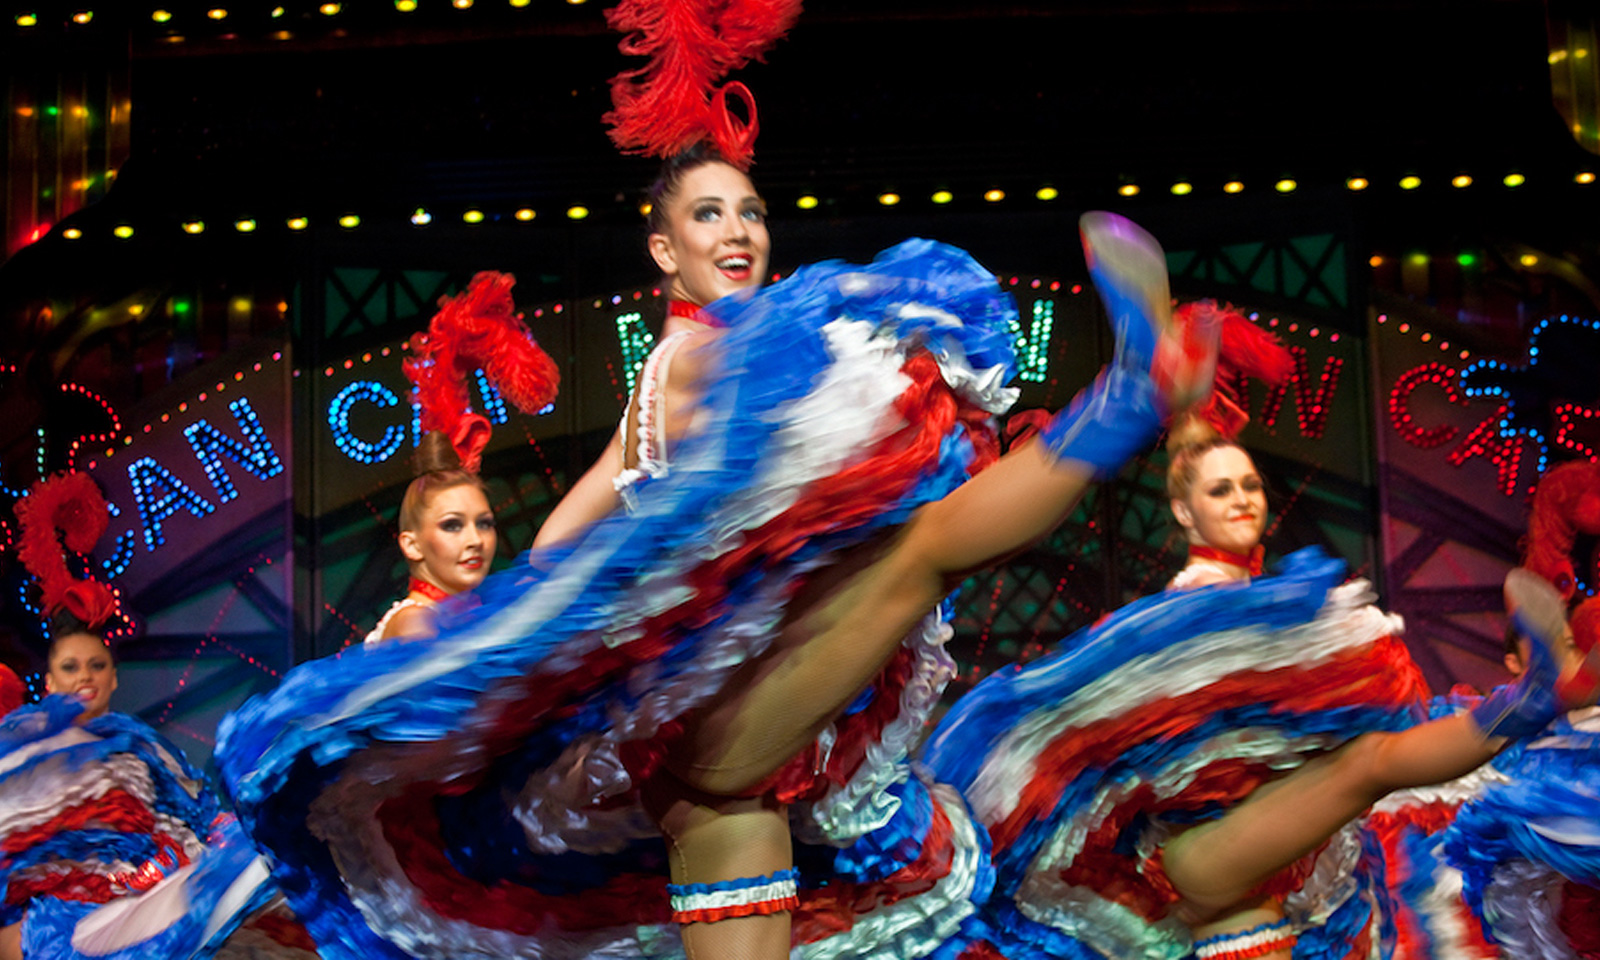 The fascinating Moulin Rouge dancers take center stage at the 2018 Ryder Cup in France.